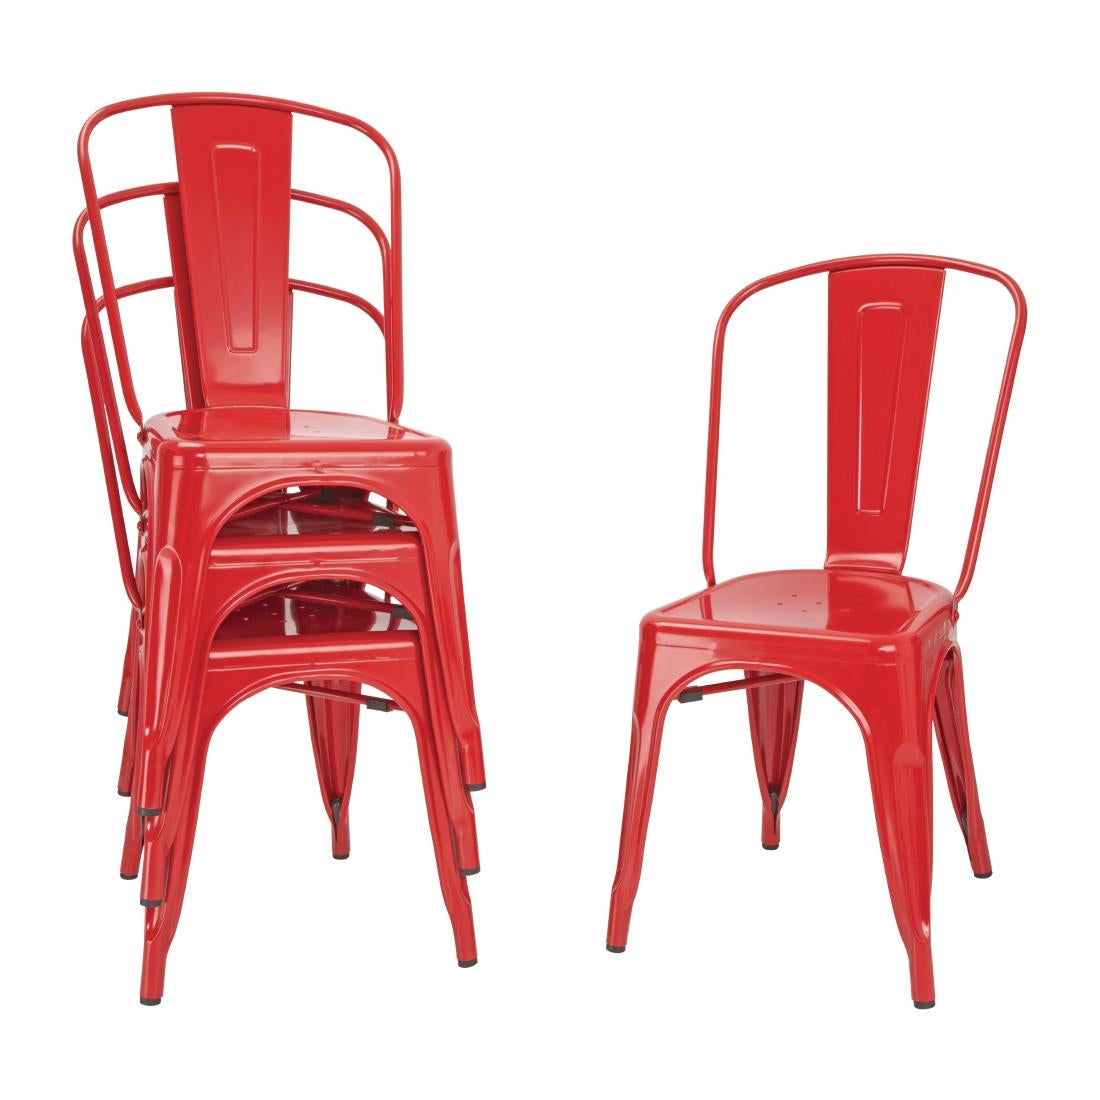 Bolero Bistro Steel Side Chair (Pack of 4) JD Catering Equipment Solutions Ltd